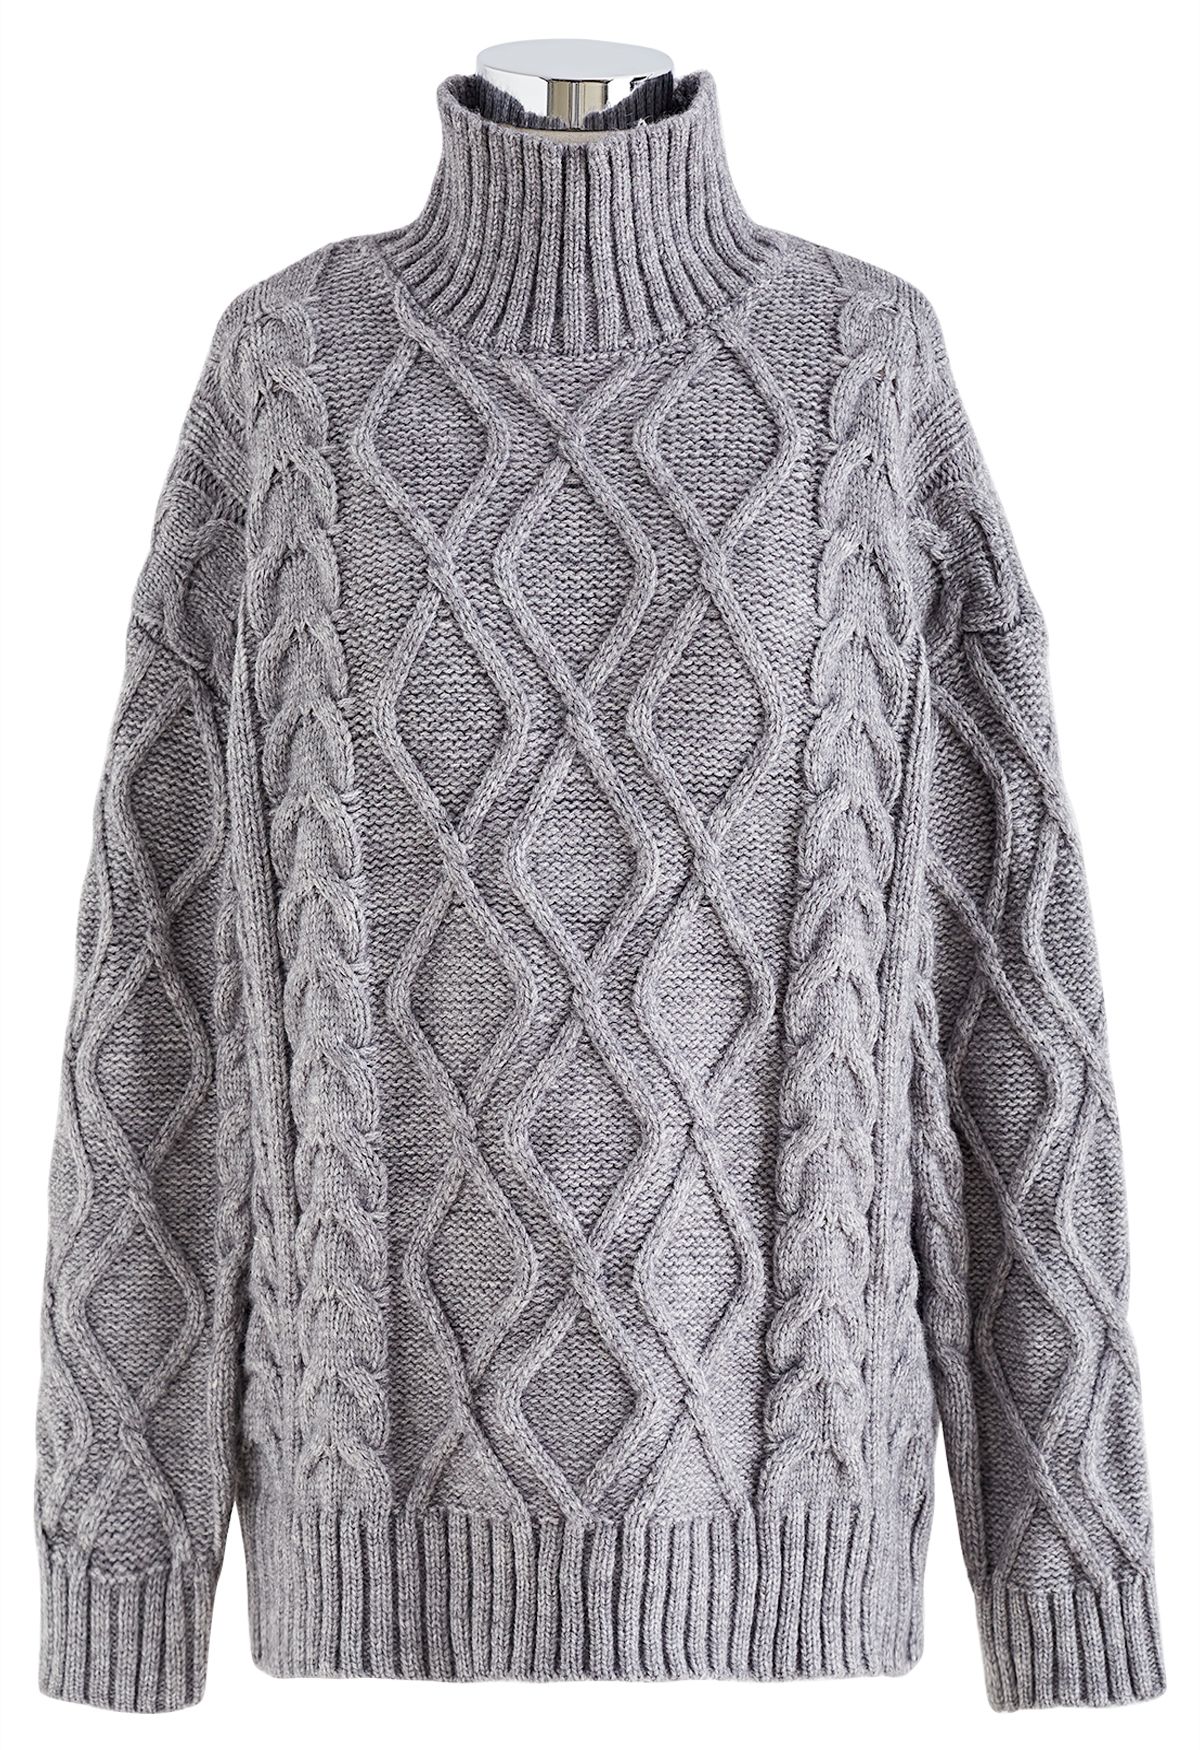 High Neck Braided Knit Sweater and Shorts Set in Grey - Retro, Indie ...